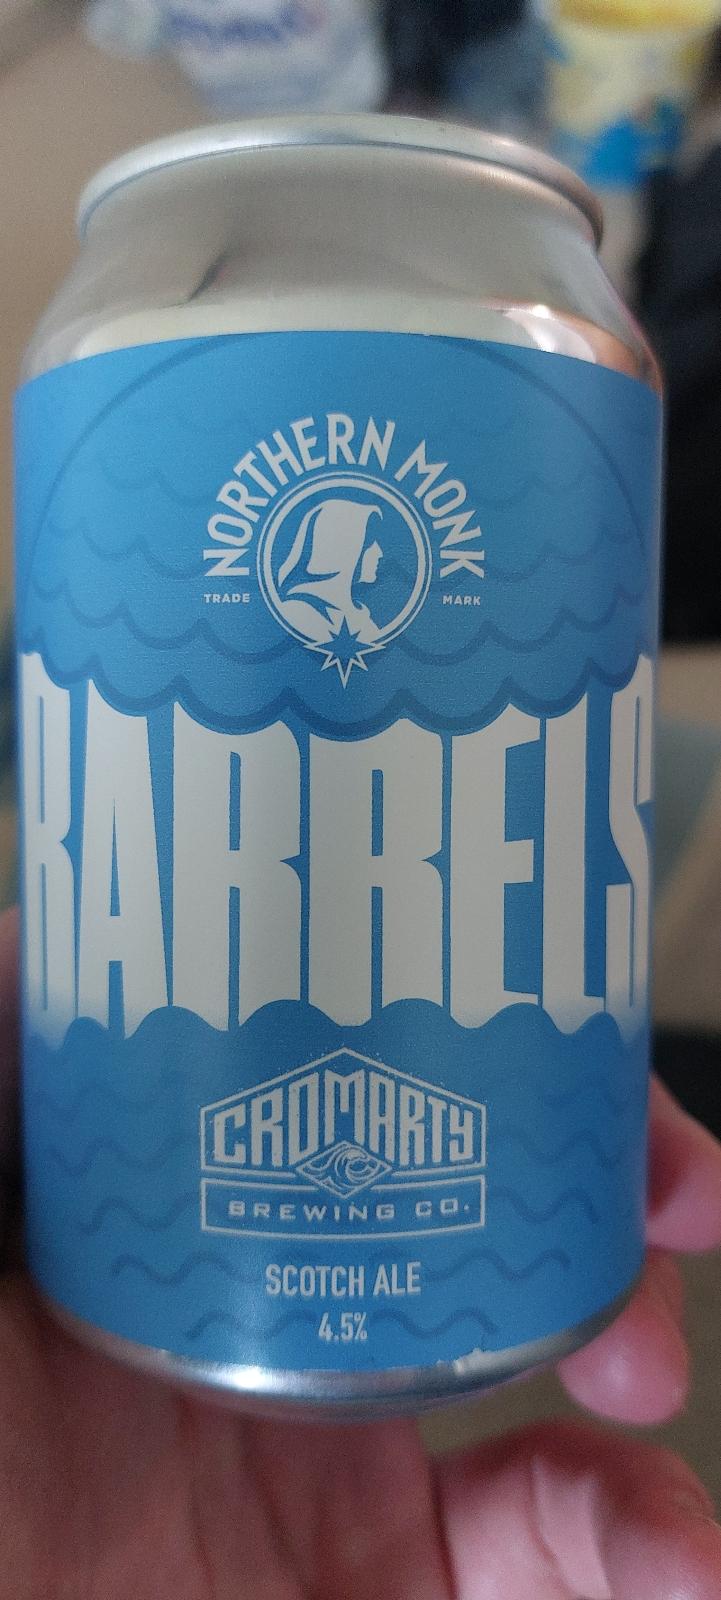 Barrels (Collaboration with Cromarty Brewing Company)